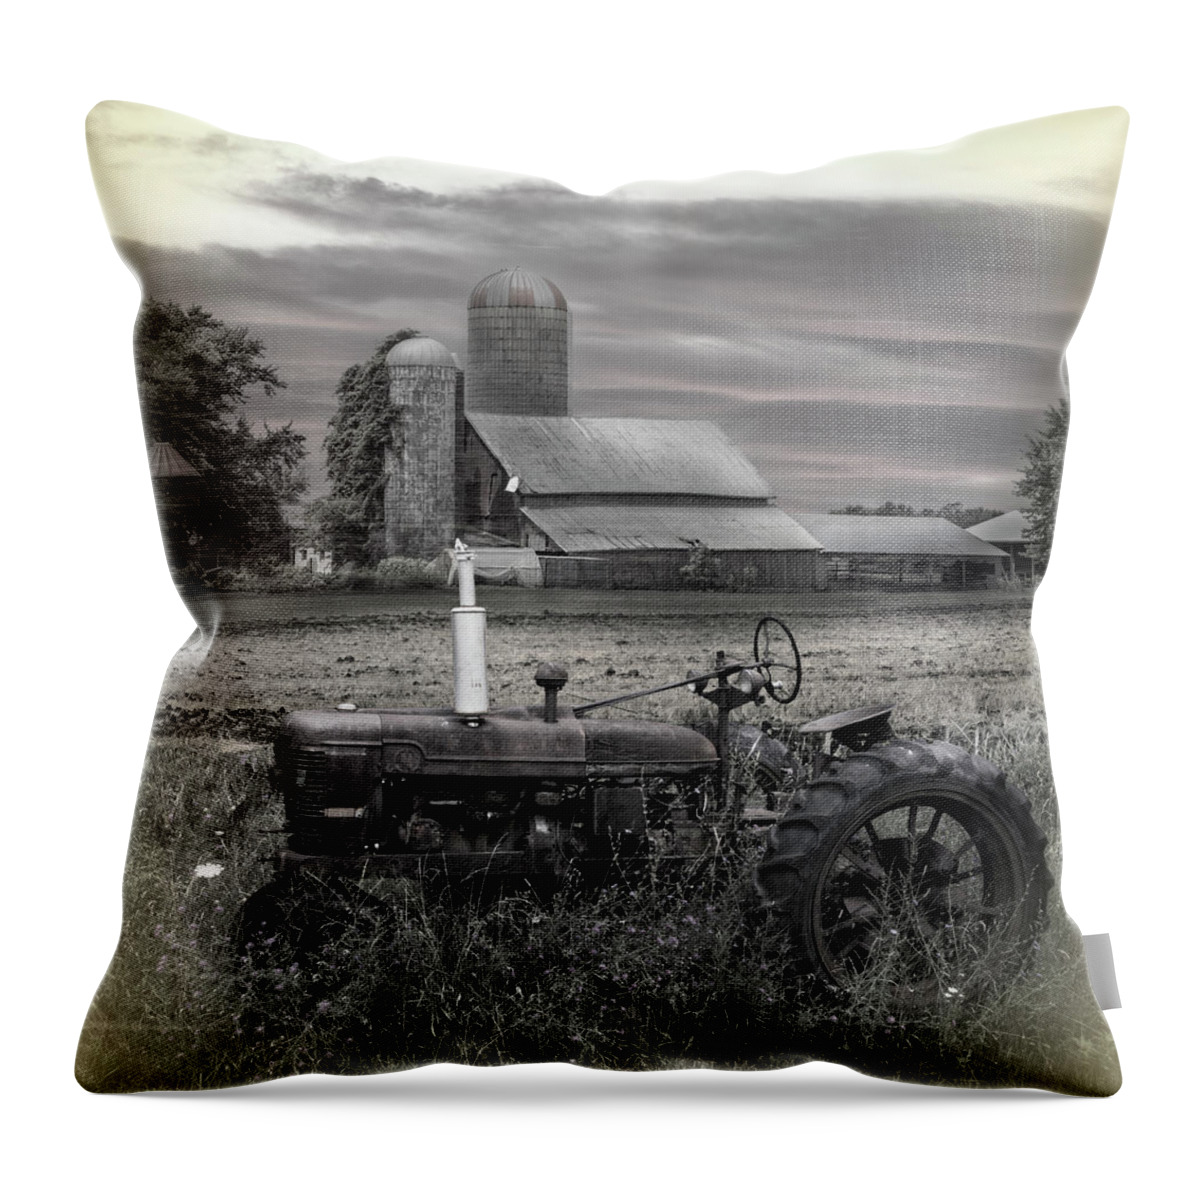 Barns Throw Pillow featuring the photograph Vintage Tractor at the Country Farm by Debra and Dave Vanderlaan